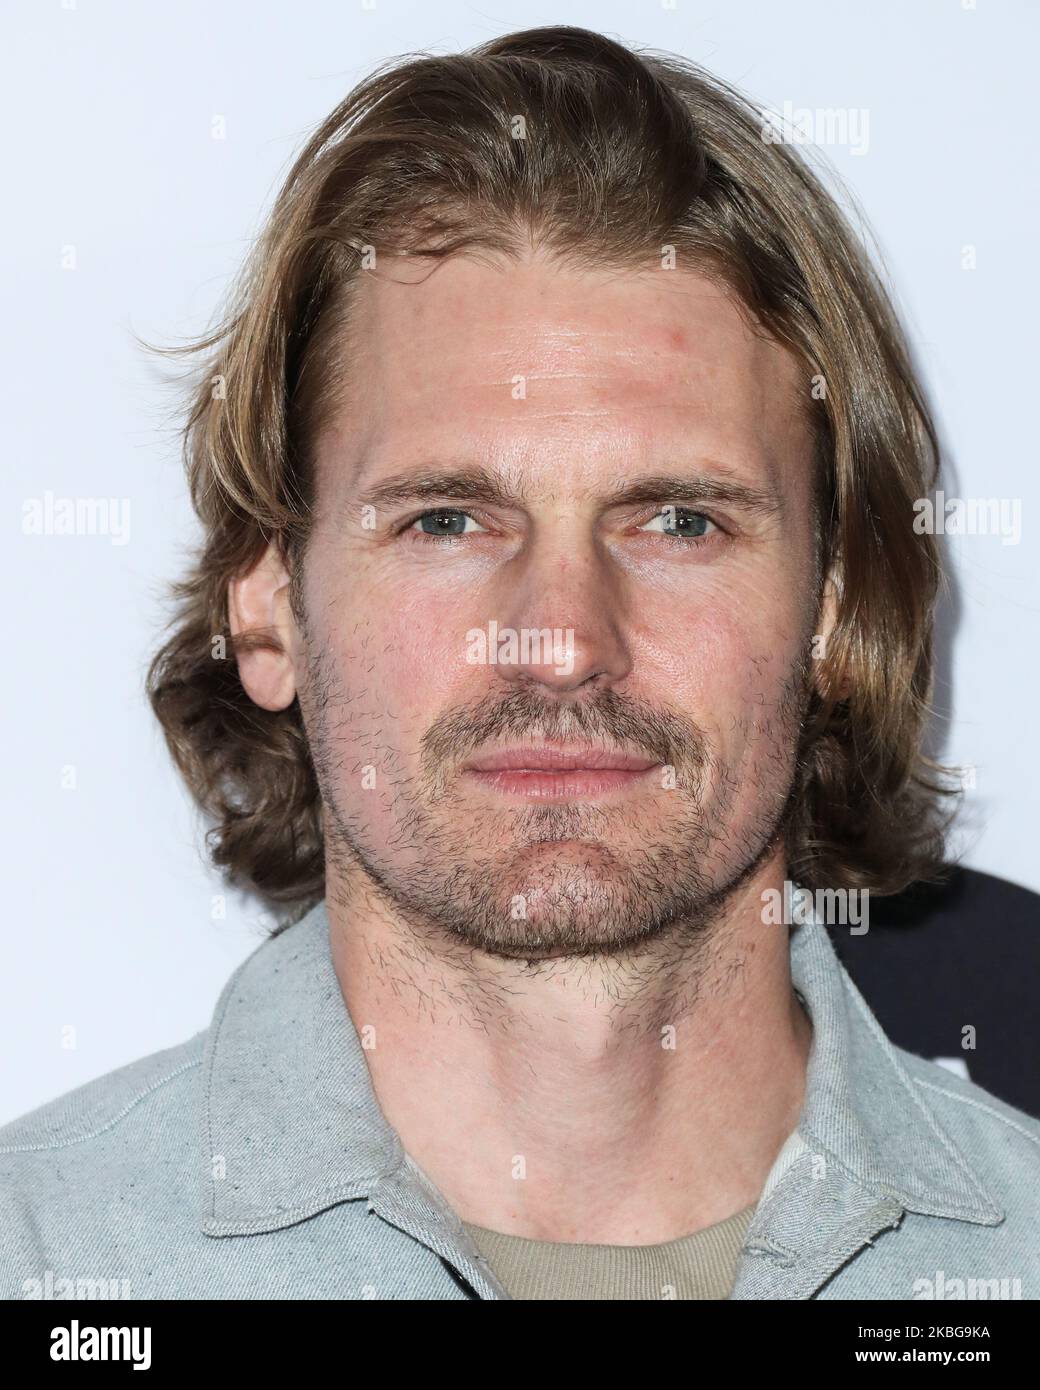 LOS ANGELES, CALIFORNIA, USA - FEBRUARY 05: Josh Pence arrives at the Los Angeles Art Show 2020 Opening Night Gala held at the Los Angeles Convention Center on February 5, 2020 in Los Angeles, California, United States. (Photo by Xavier Collin/Image Press Agency/NurPhoto) Stock Photo